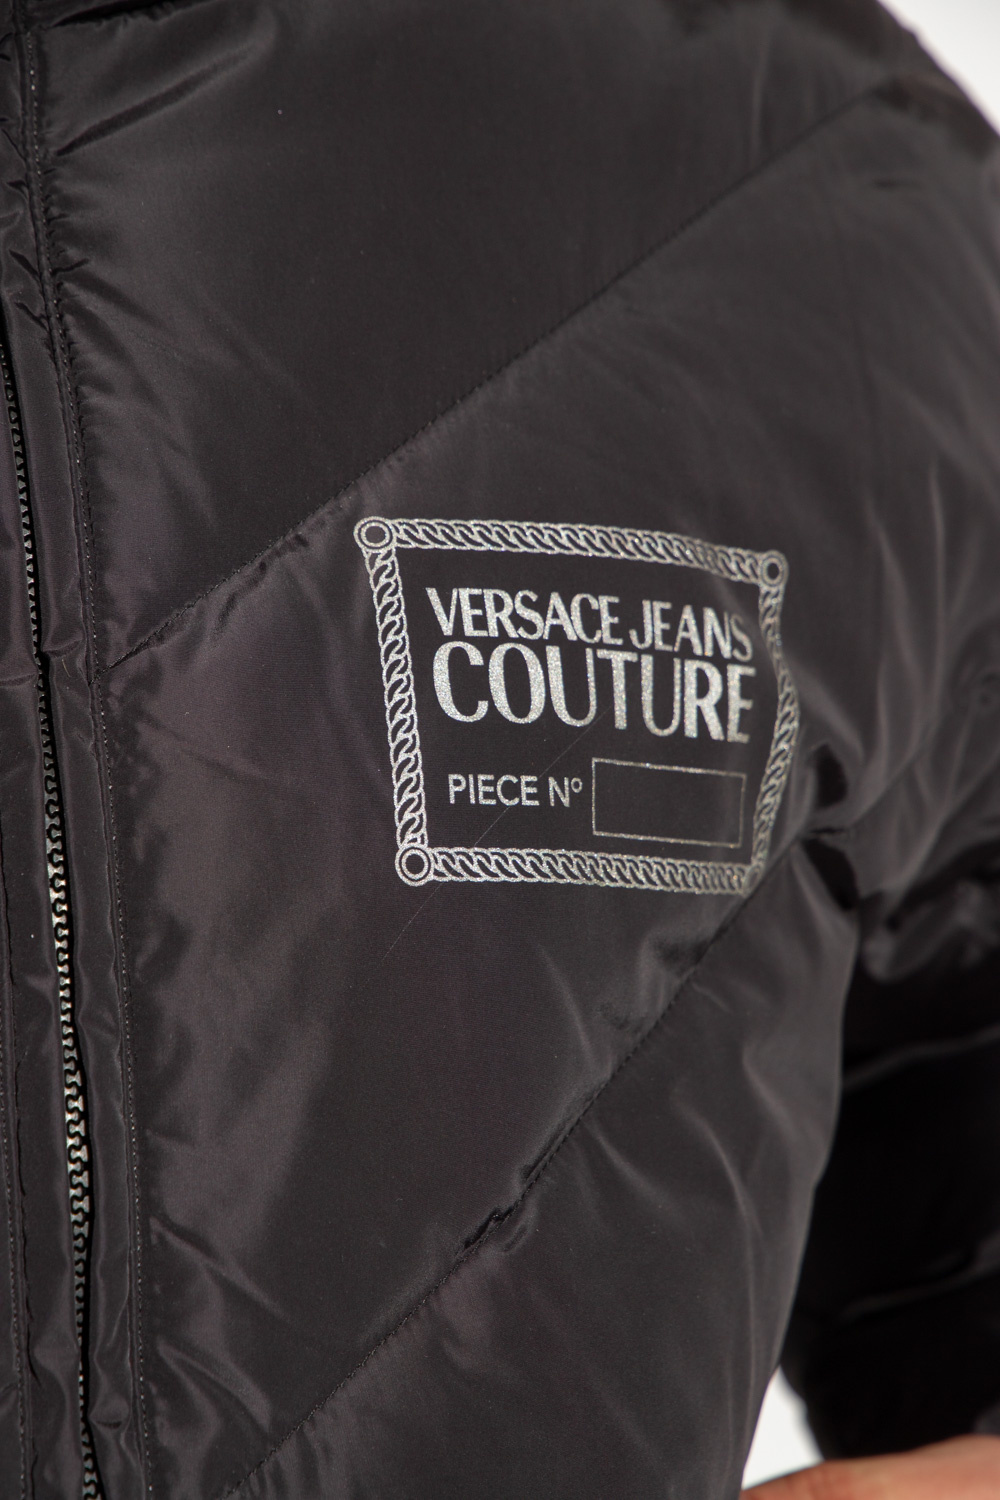 Versace Jeans Couture supreme reworked frankie collective boots puffer goldbergh jacket tearaway pants